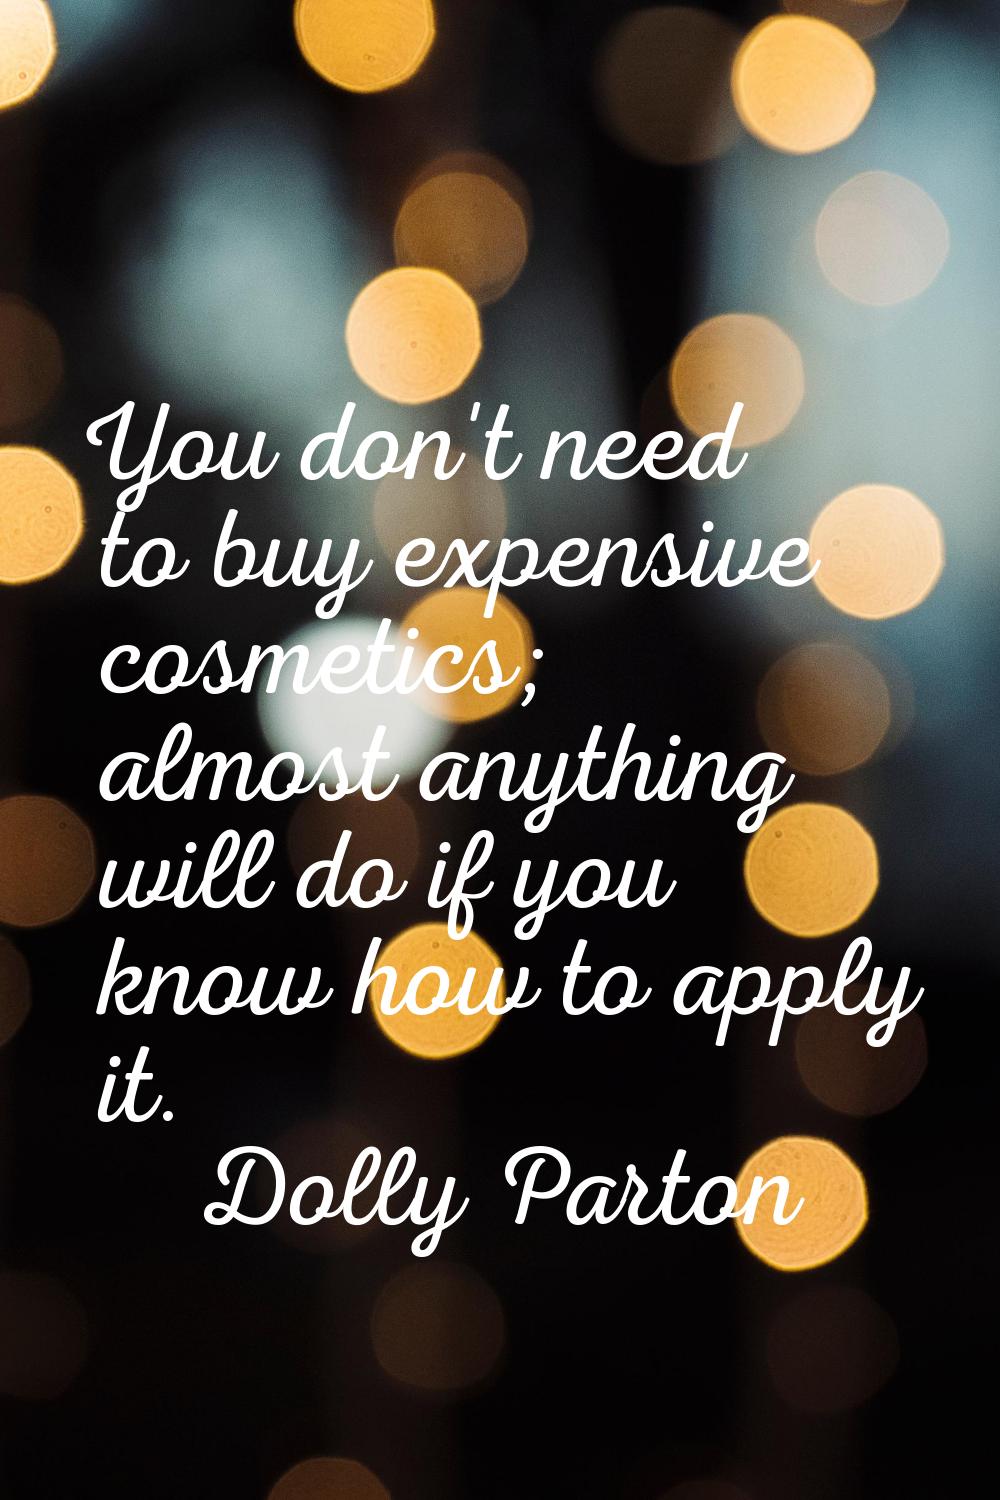 You don't need to buy expensive cosmetics; almost anything will do if you know how to apply it.